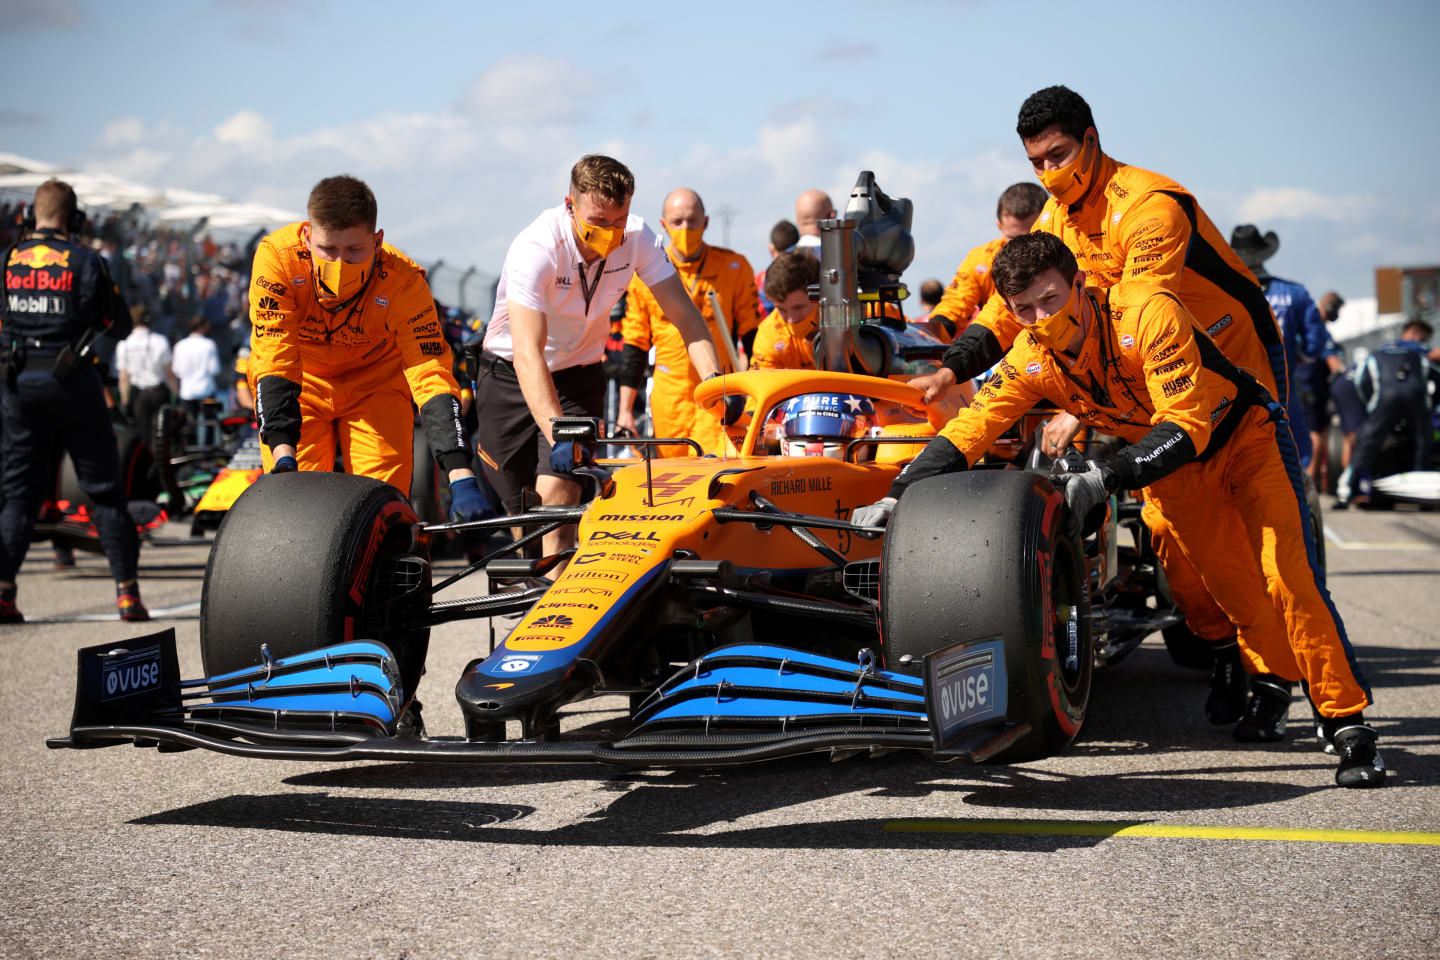 AUSTIN, TEXAS - OCTOBER 24: Lando Norris of Great Britain and McLaren F1 prepares to drive on the grid during the F1 Grand Prix of USA at Circuit of The Americas on October 24, 2021 in Austin, Texas. (Photo by Chris Graythen/Getty Images)